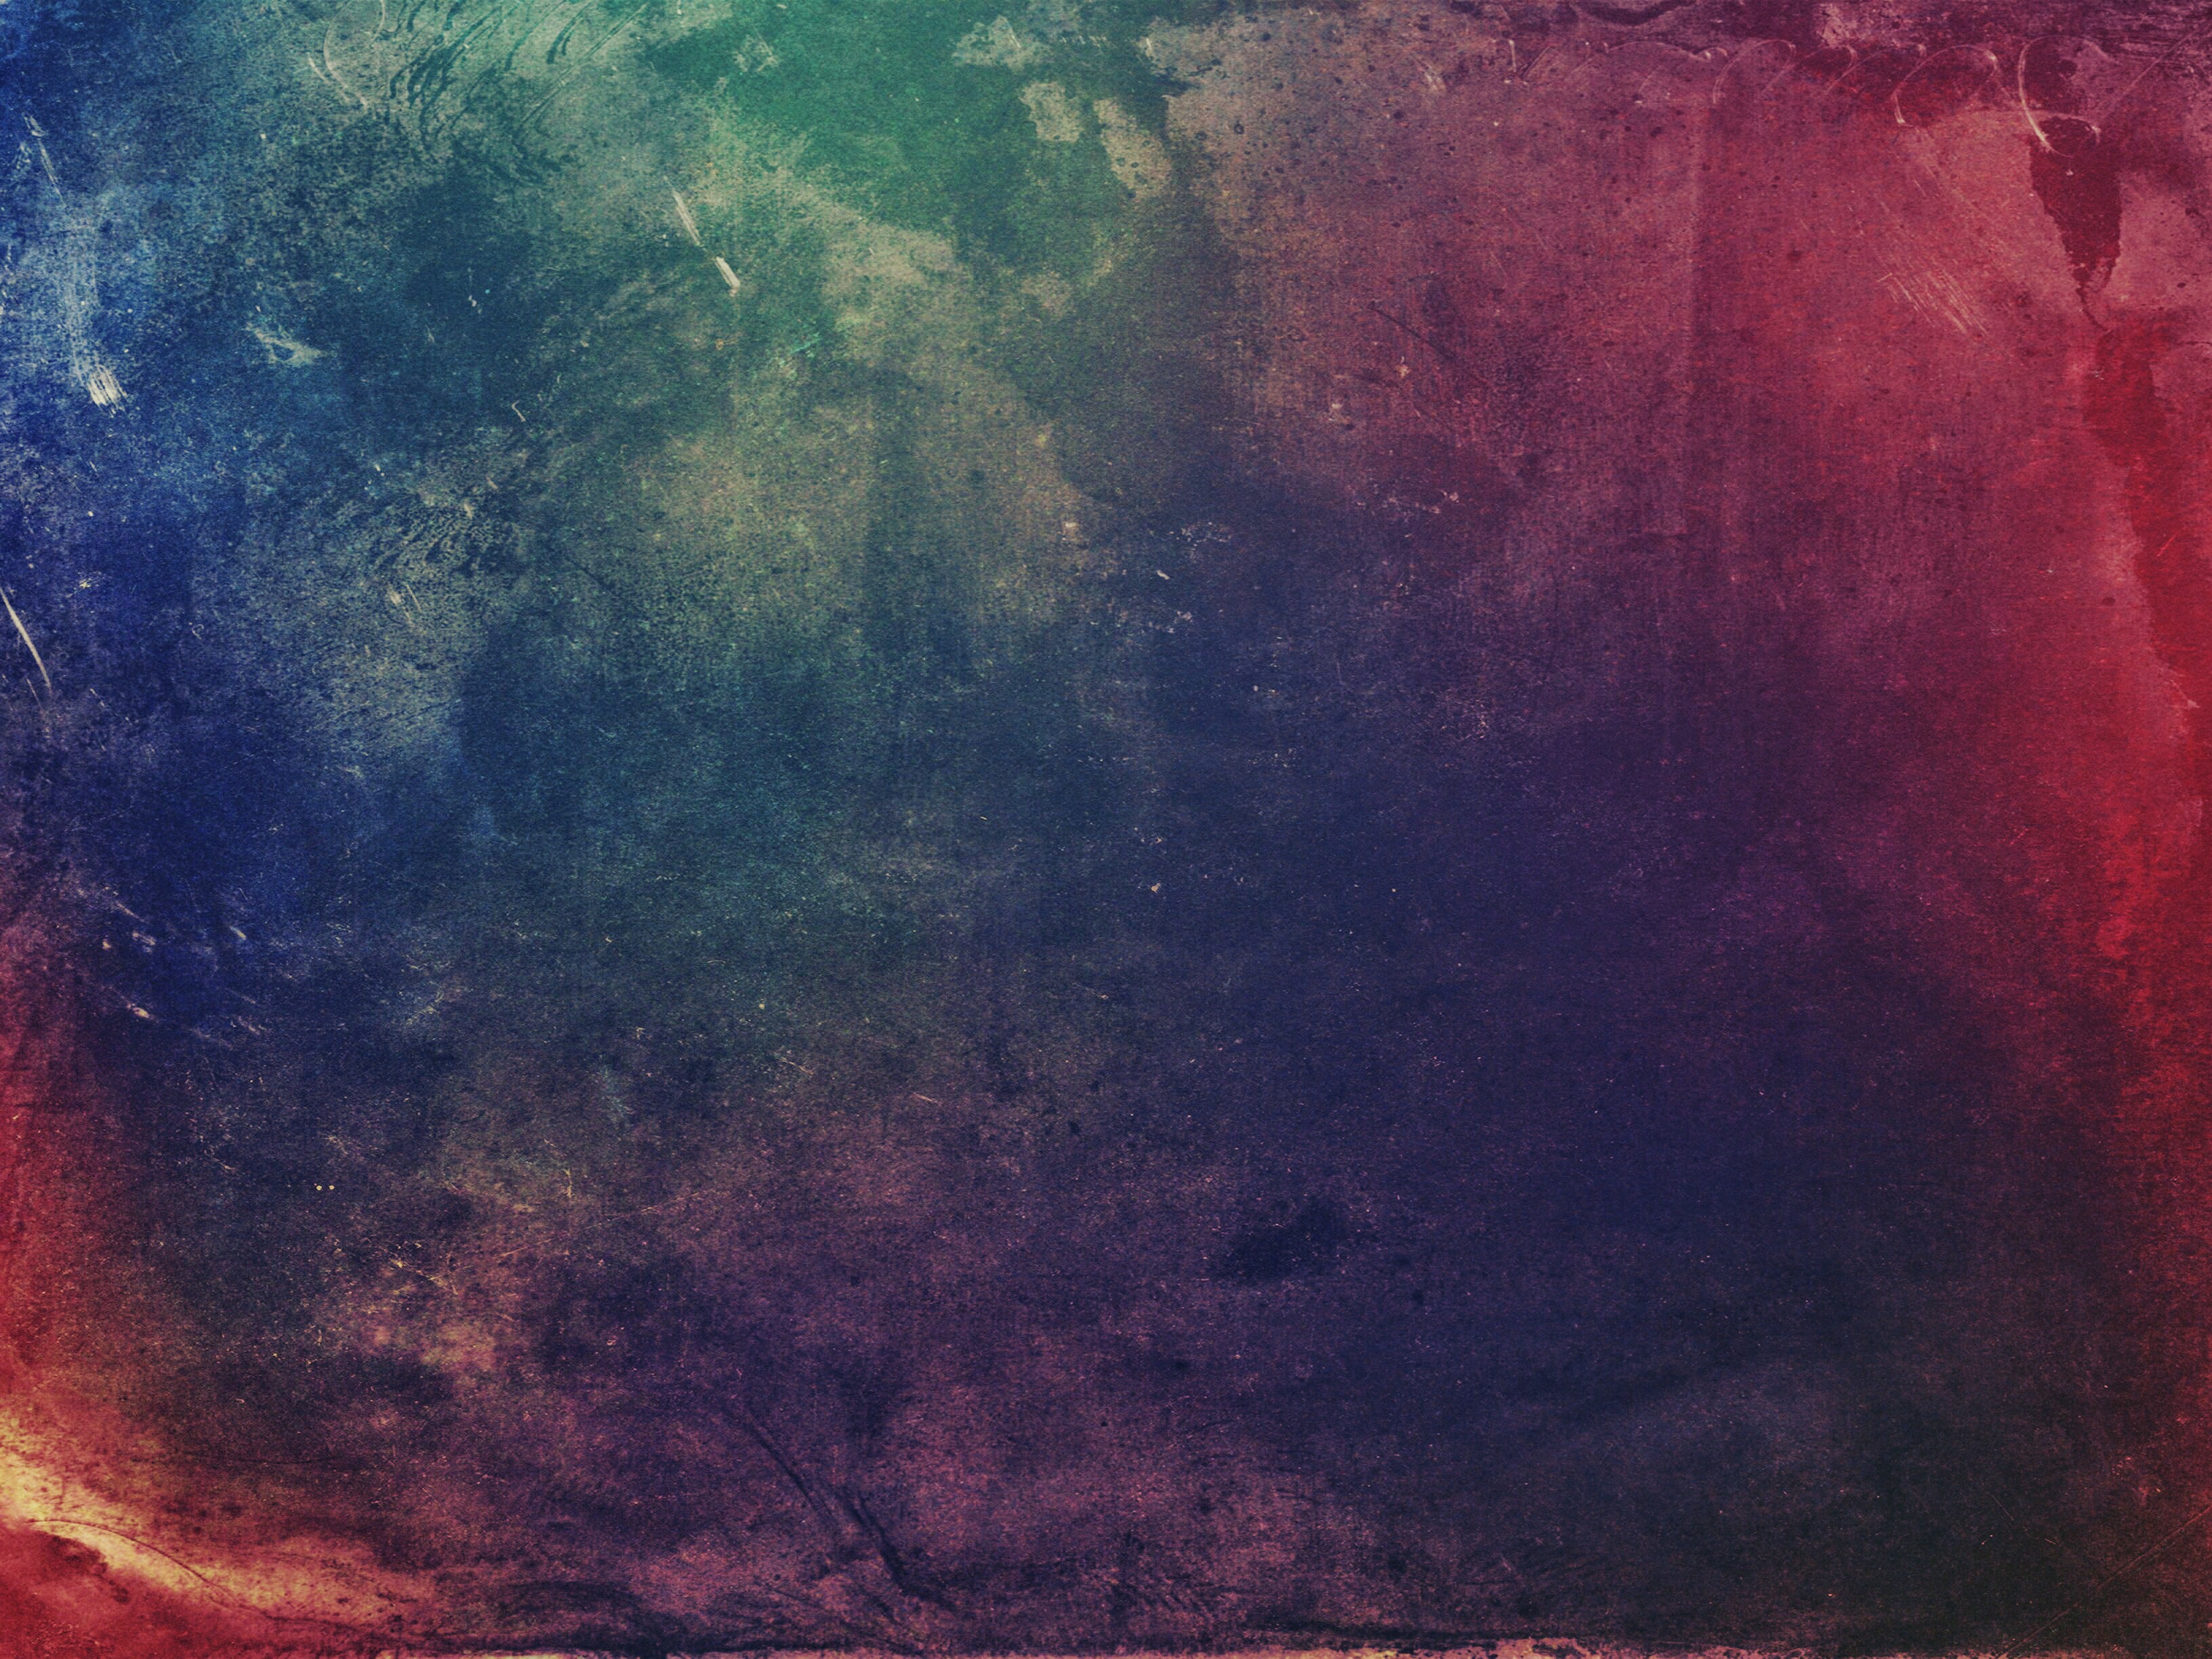 texture, dark, textures, stains, spots, gradient cell phone wallpapers